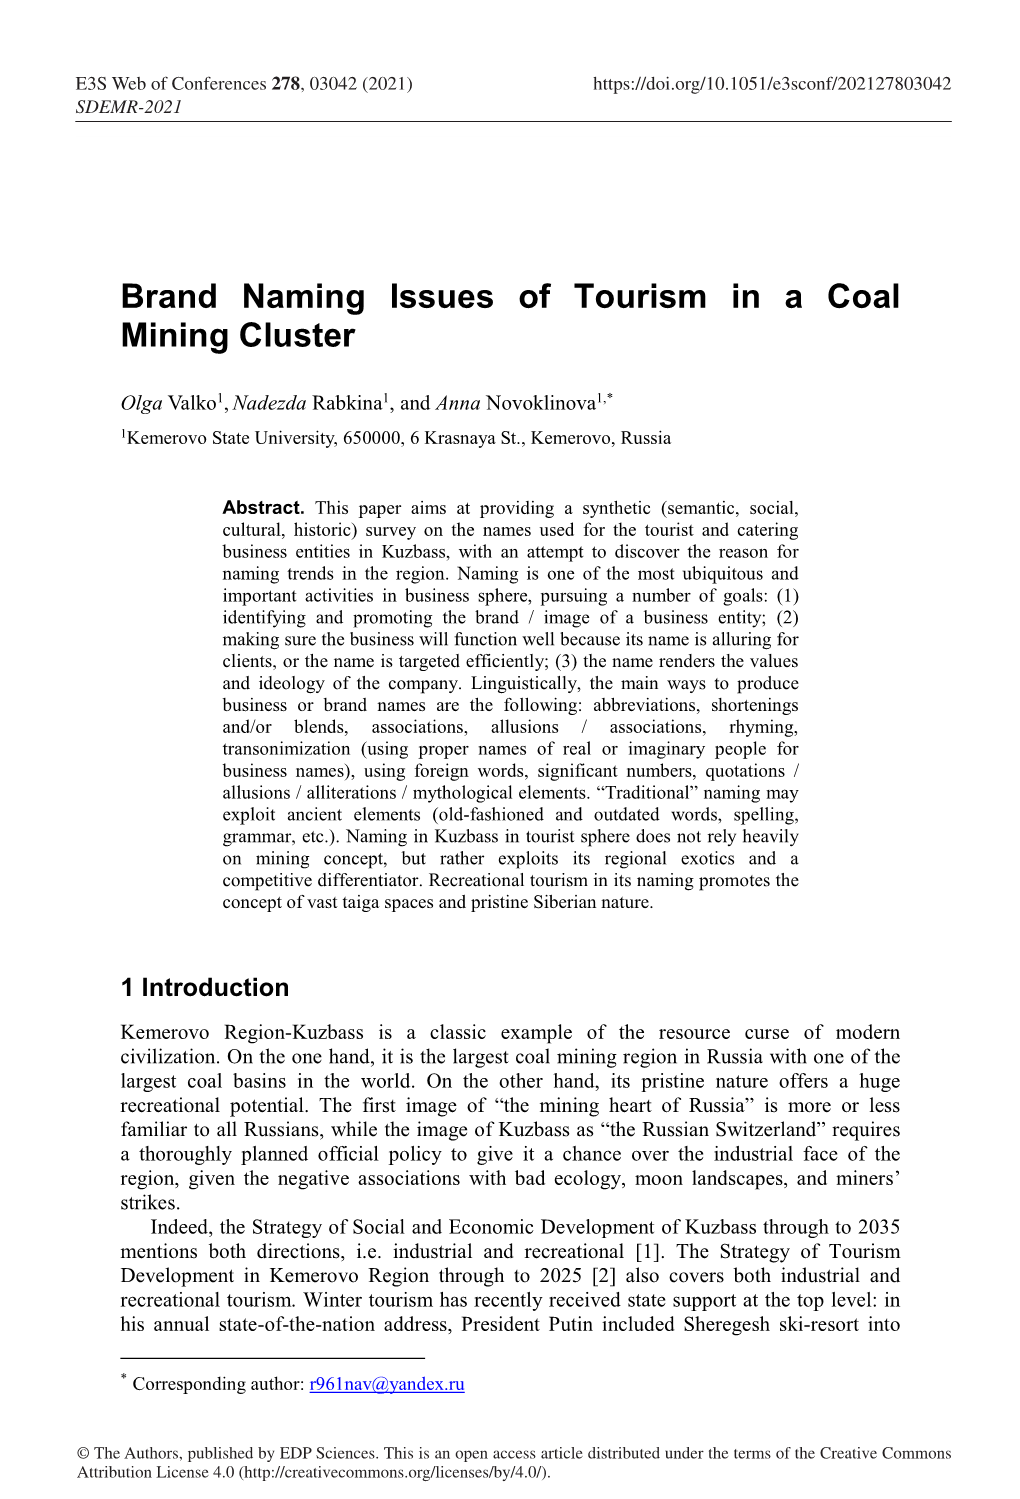 Brand Naming Issues of Tourism in a Coal Mining Cluster